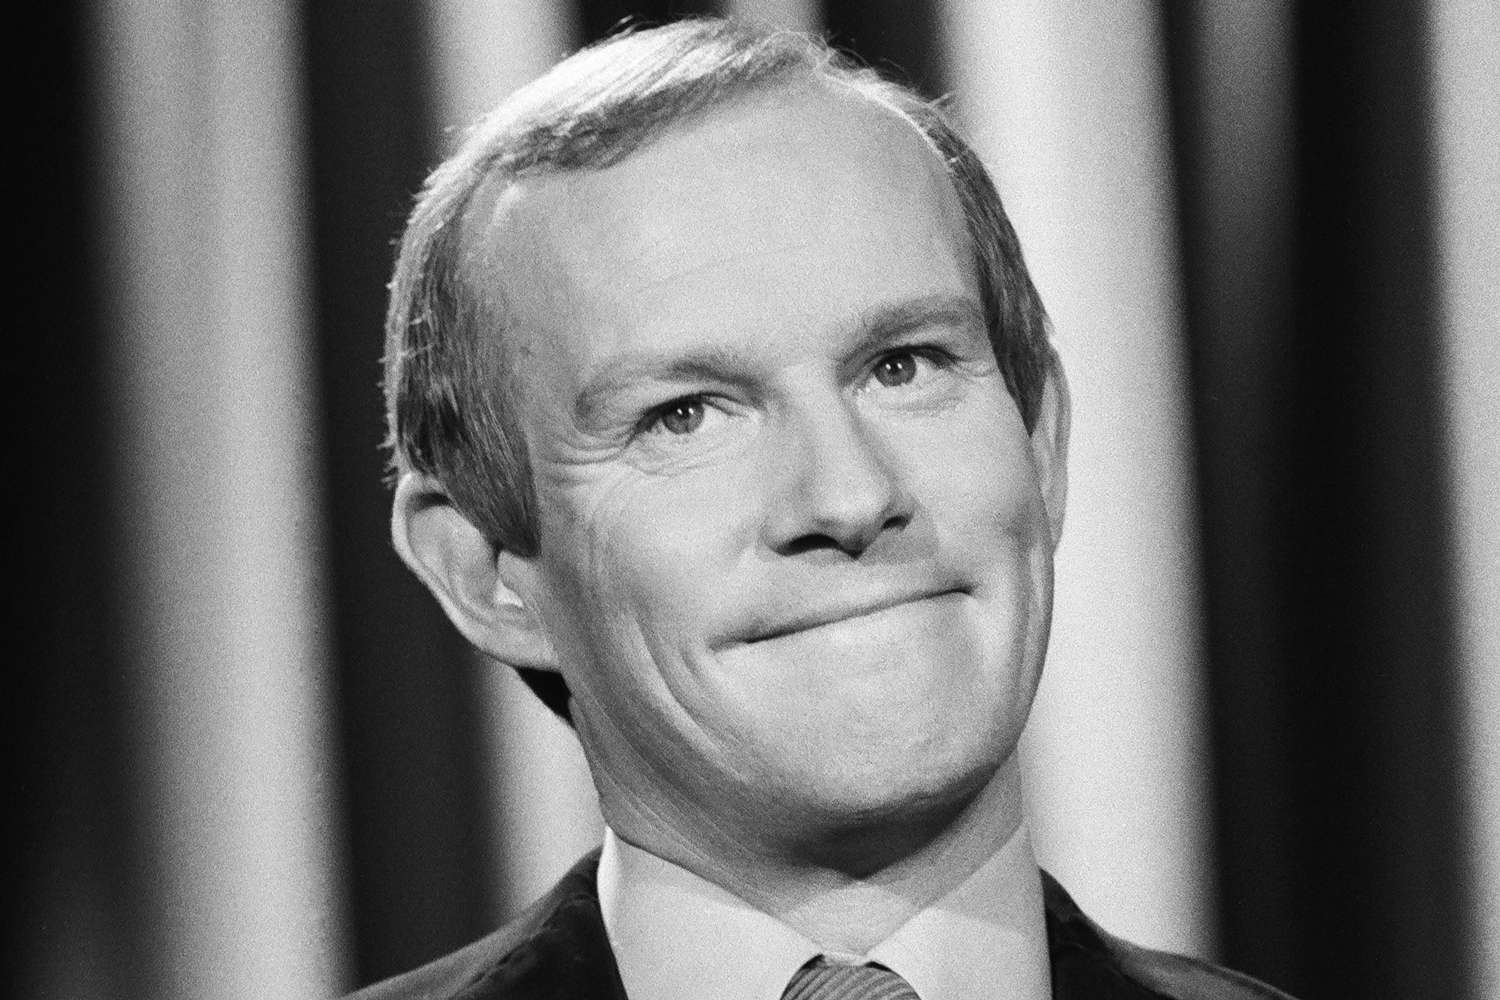 Tom Smothers, Dead at 86